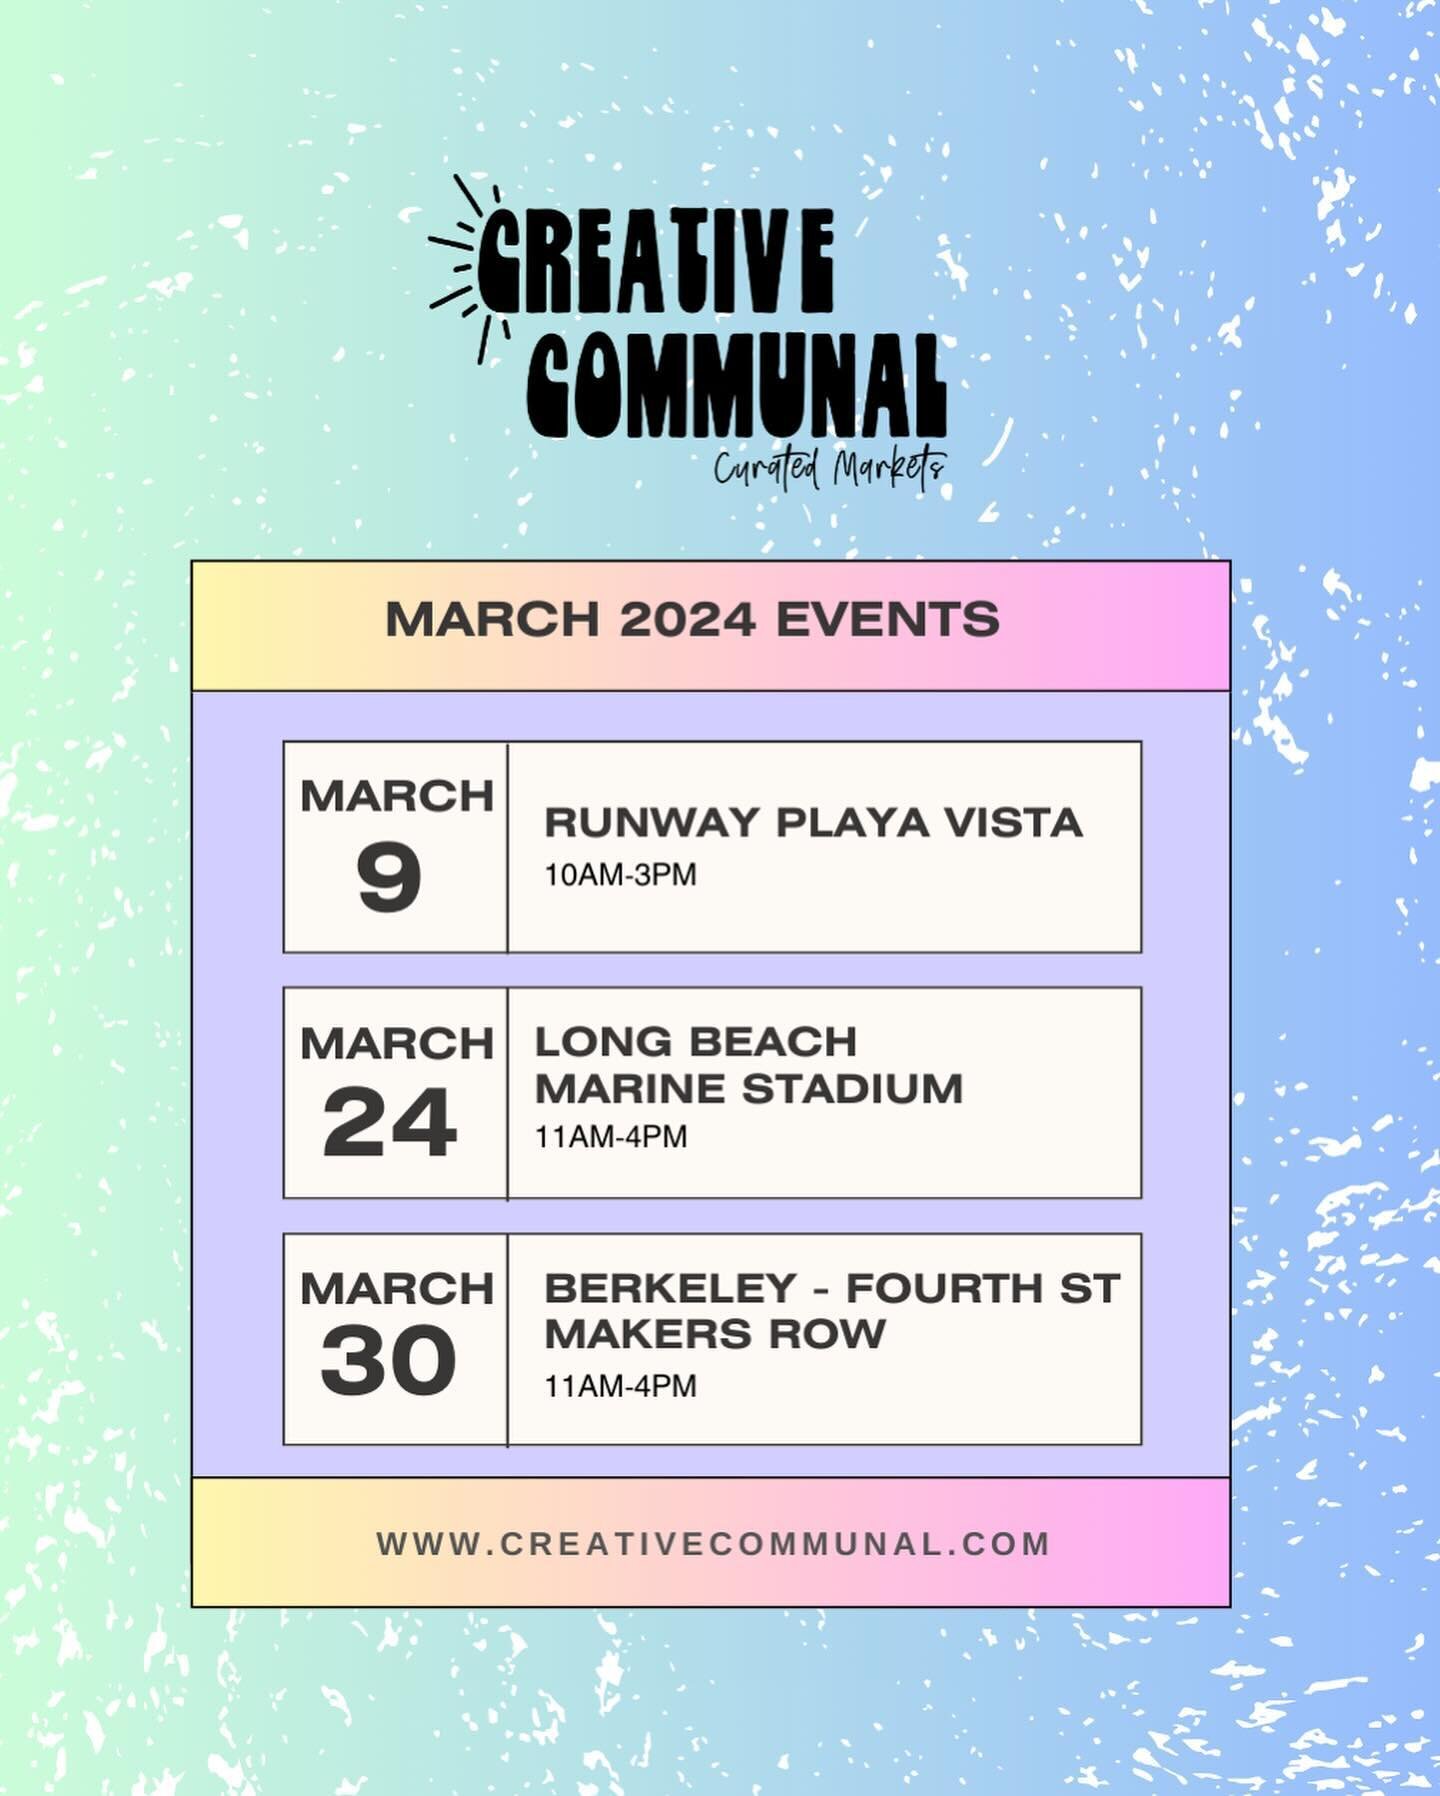 Come kick off Spring with us at one of our events this March! Support local artisans - enjoy permanent jewelry - photo opportunities - and so much more - see y'all soon ✌🏽